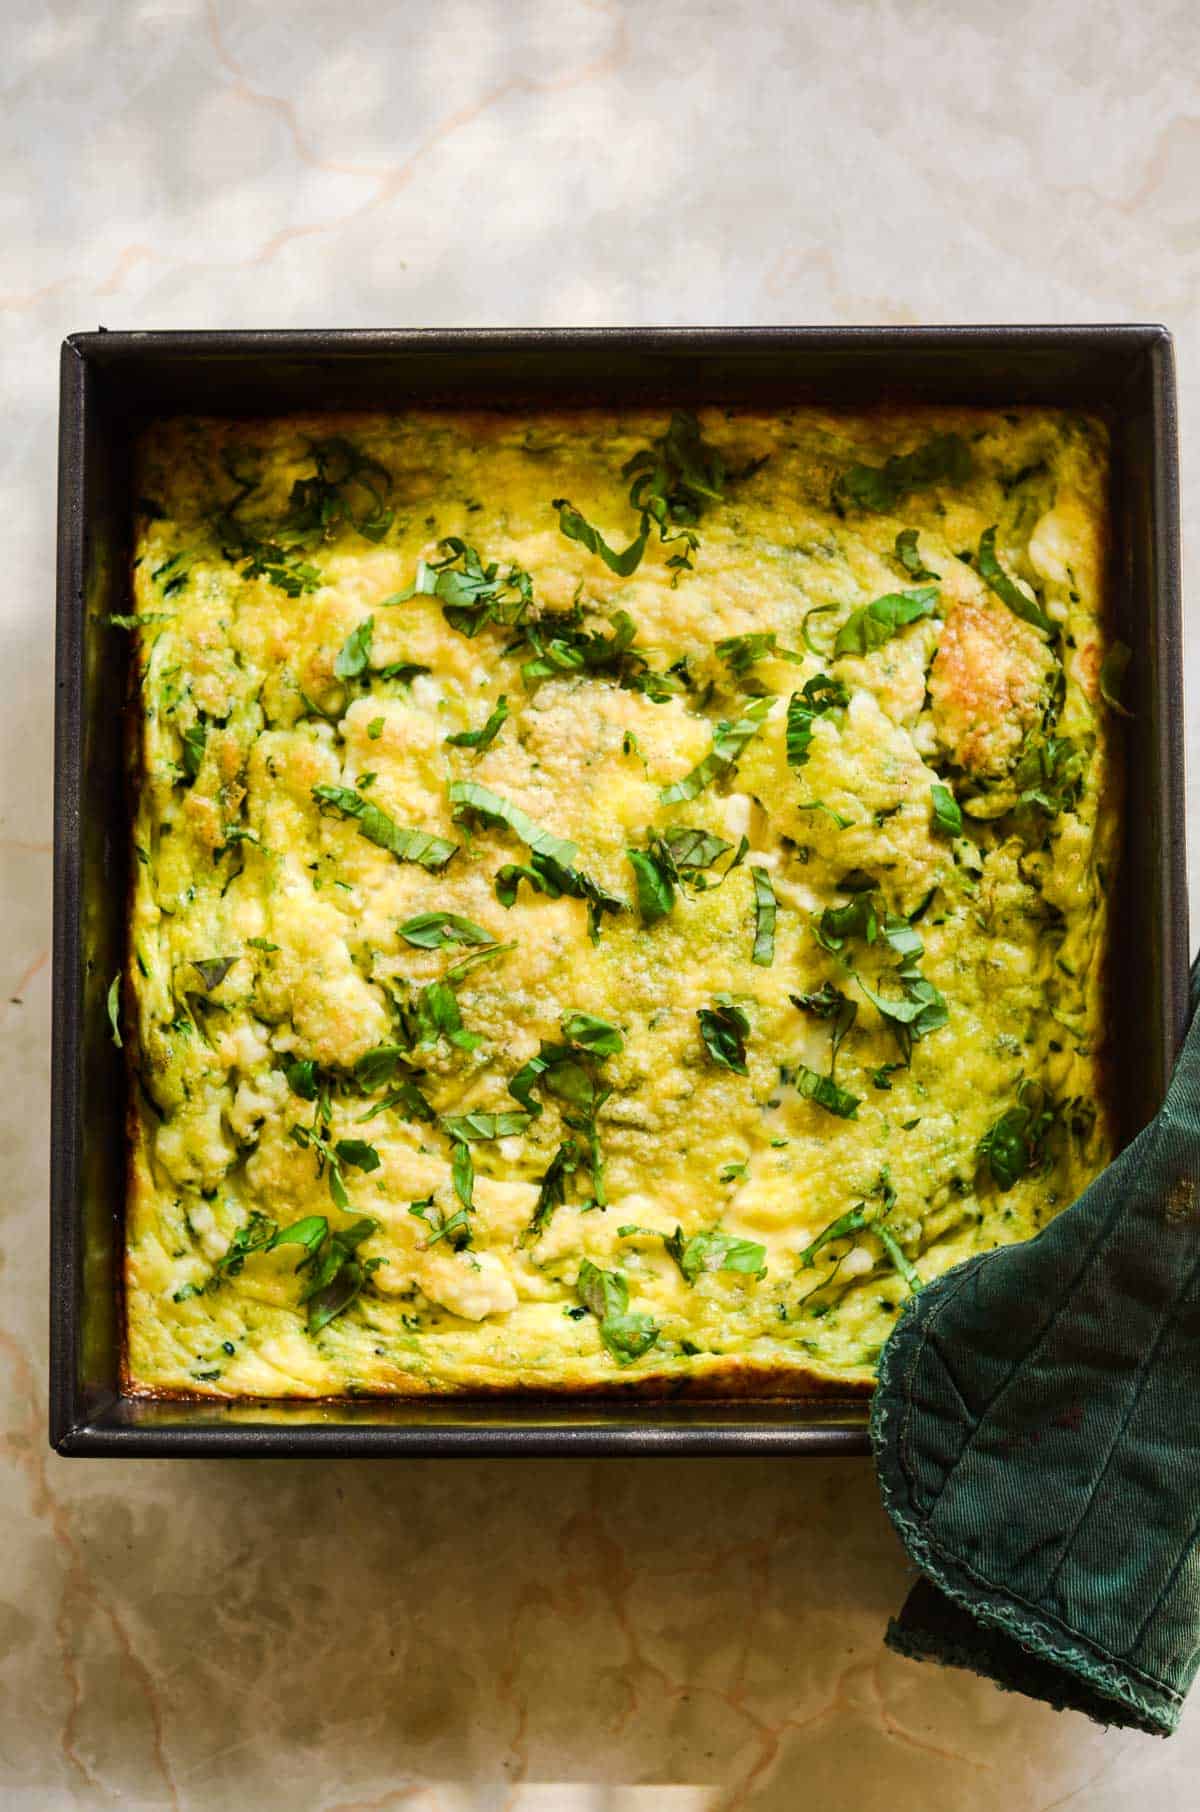 Flay lay of yellow eggs baked with green flecks of zucchini and fresh basil.